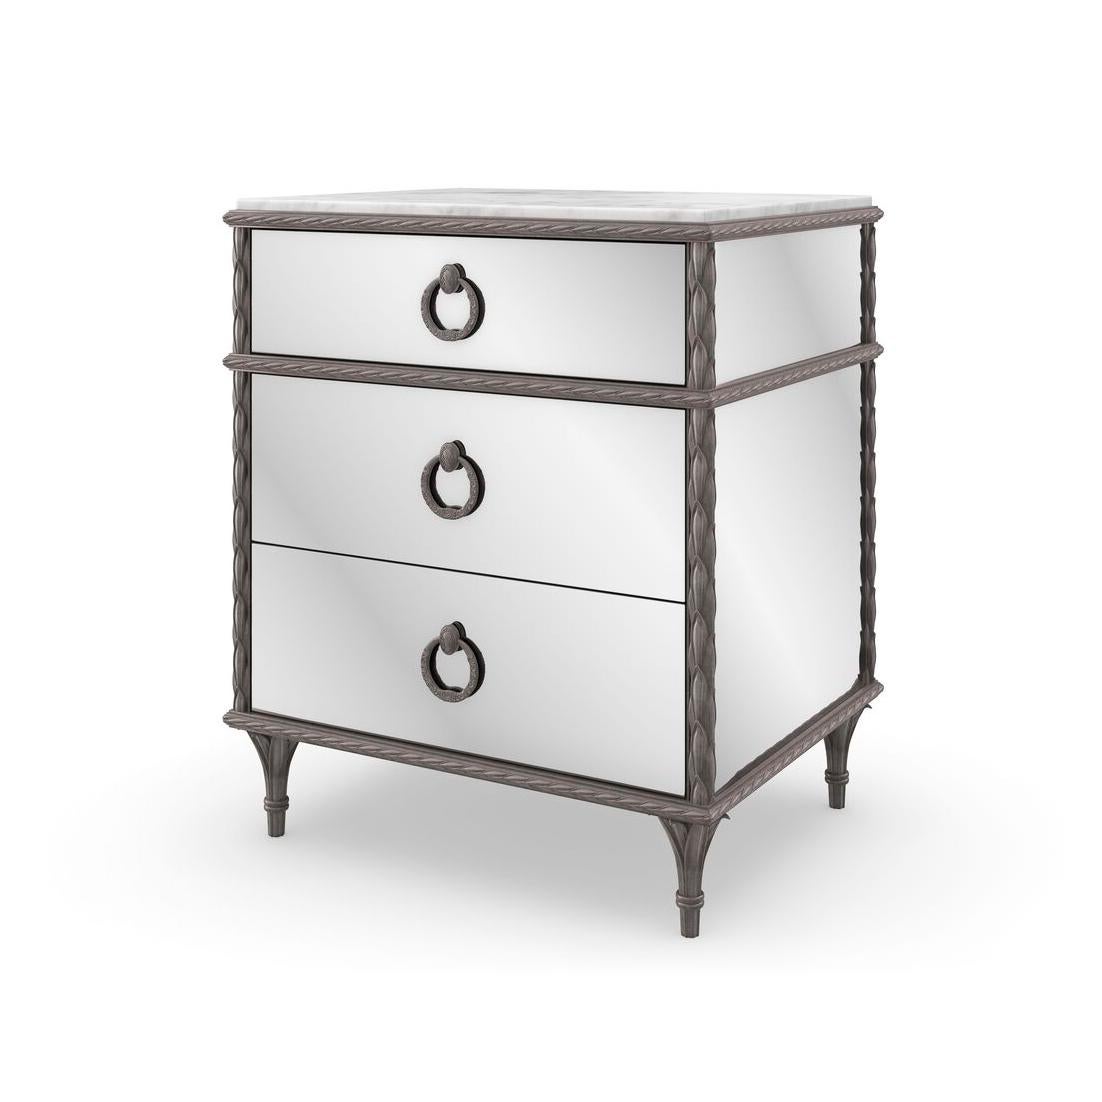 This exquisite nightstand features mirrored front and end panels that reflect light beautifully, adding a touch of glamour and spaciousness to any room.

Standing on cast aluminum legs with intricate cast moldings finished in a sophisticated Sea